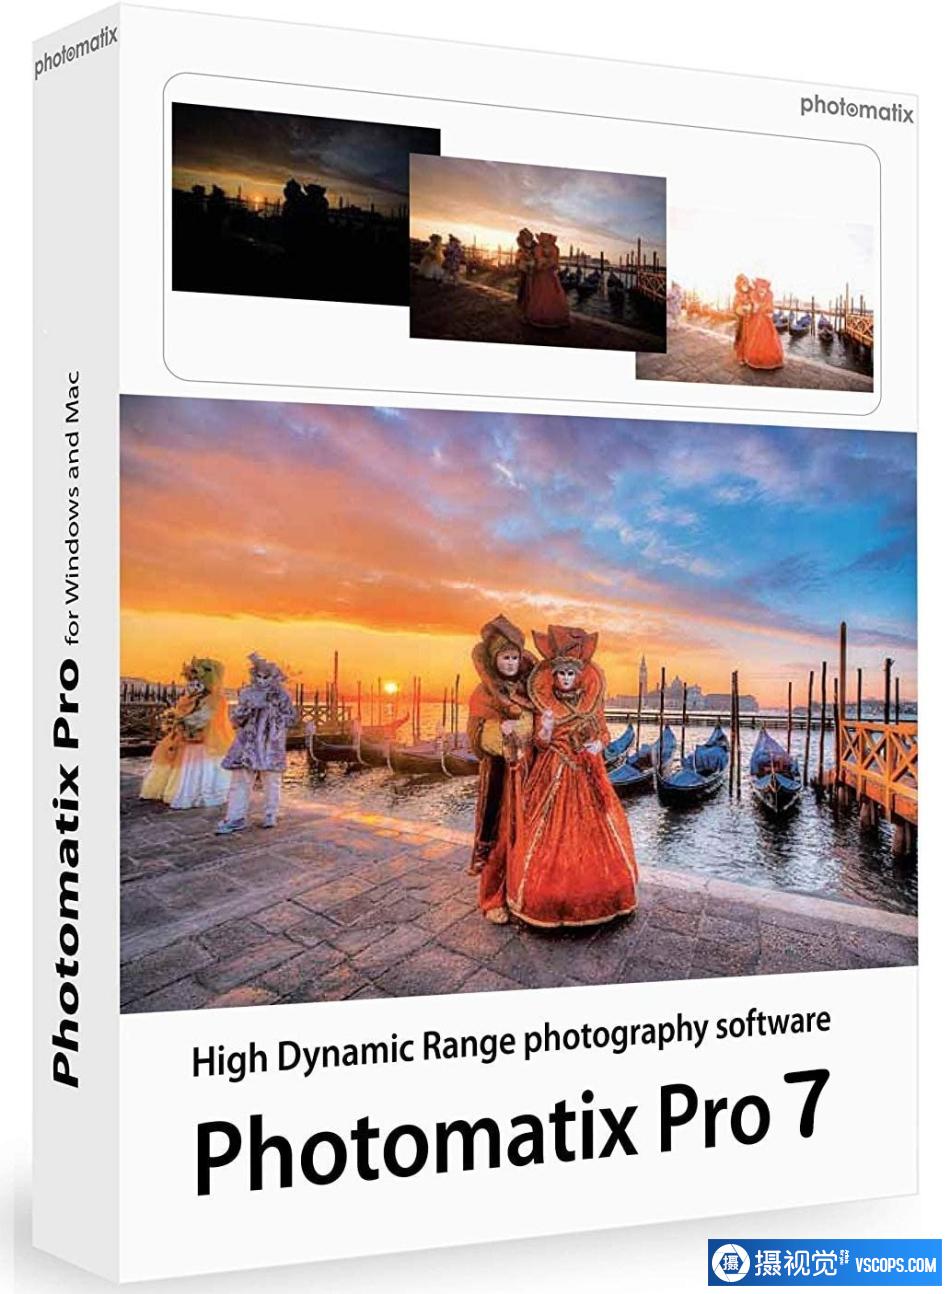 instal the new version for iphoneHDRsoft Photomatix Pro 7.1 Beta 1